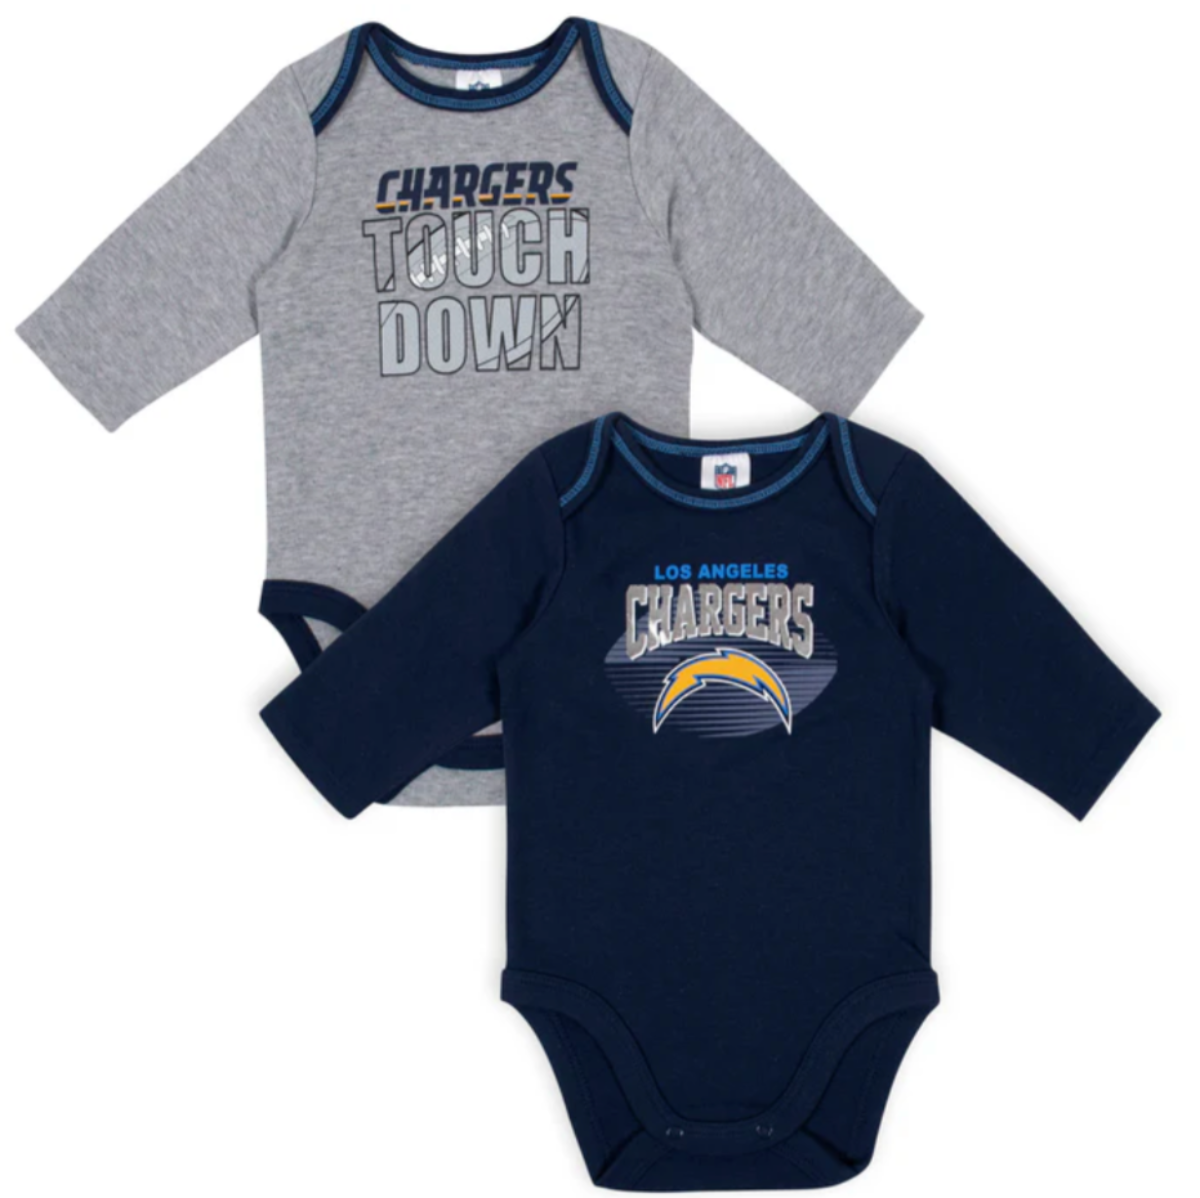 Los Angeles Chargers Baby Long Sleeve Bodysuits, 2-pack - NFL Official